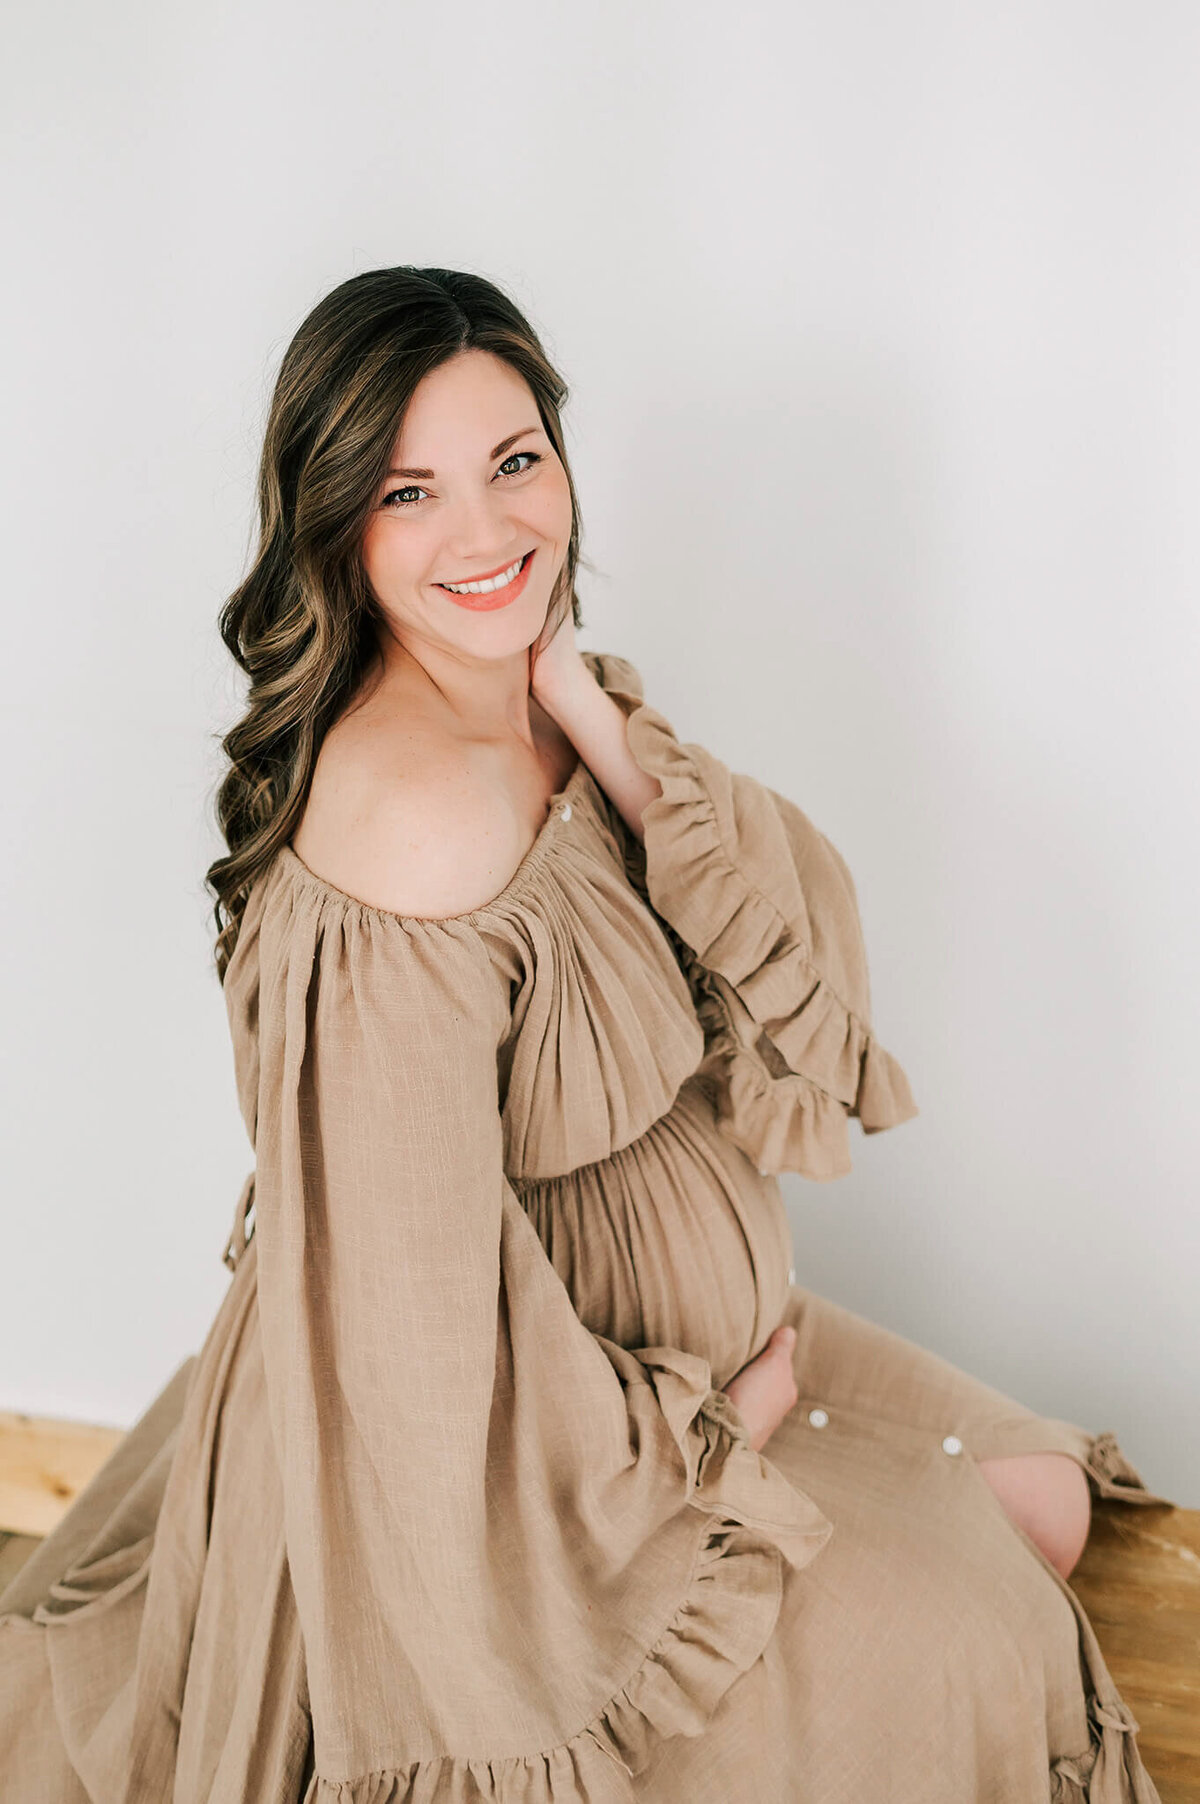 Branson MO maternity photographer Jessica Kennedy of The XO Photography captured pregnant mom in boho brown dress smiling